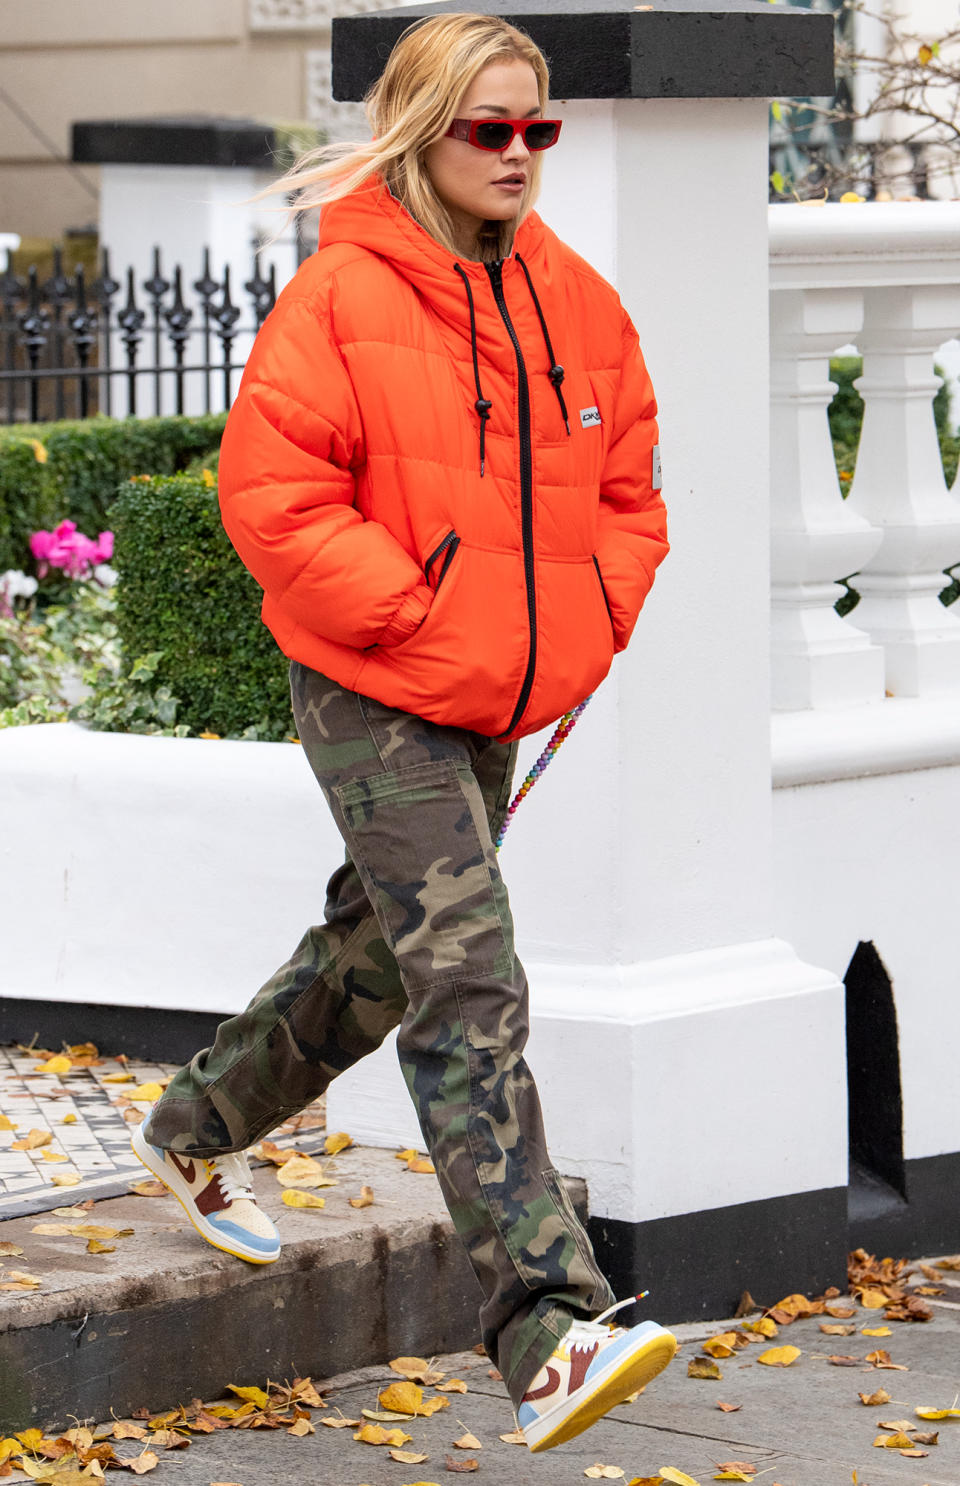 <p>Rita Ora wears a bright orange puffer coat and camo pants while leaving her home in London on Monday.</p>